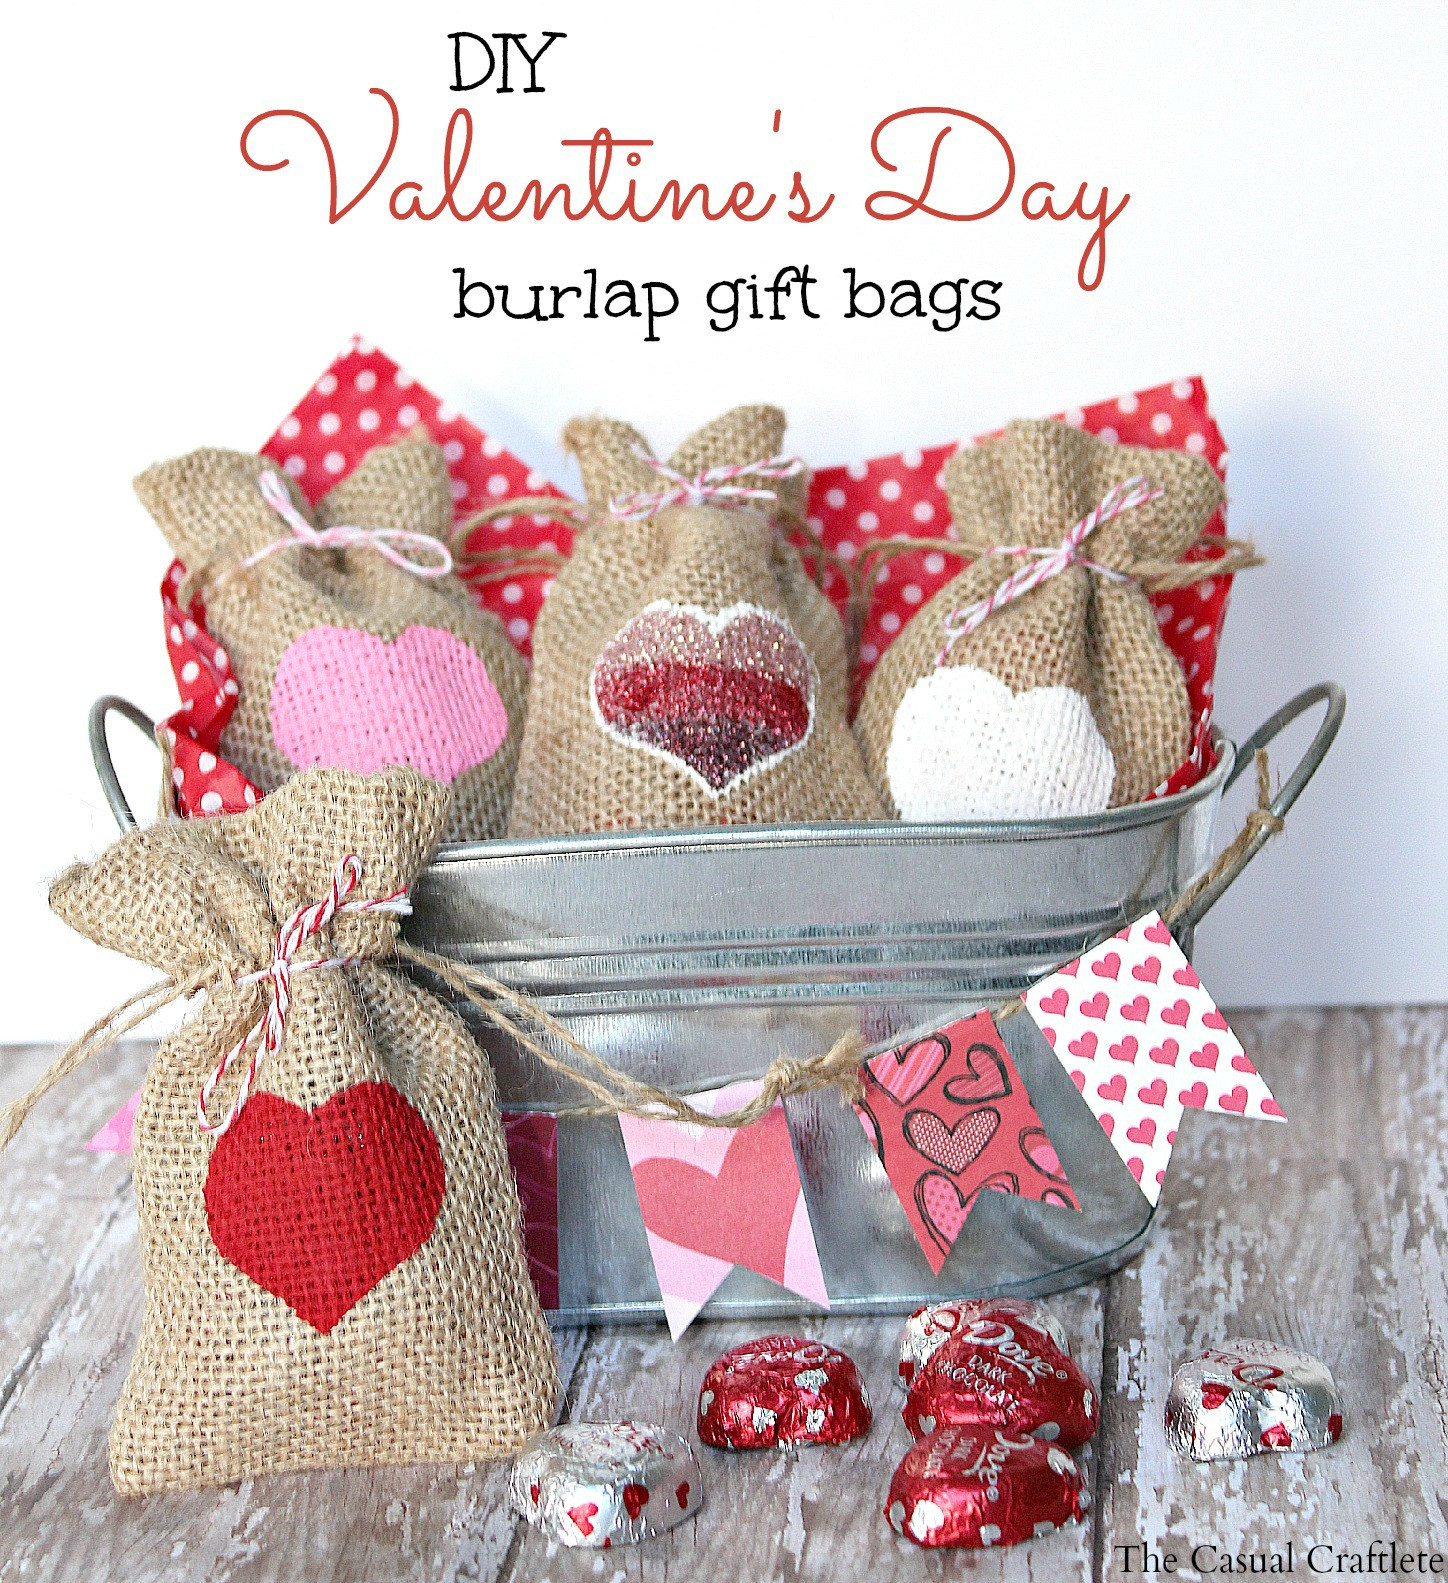 Top Gift Ideas For Valentines Day
 DIY Valentine s Day Burlap Gift Bags